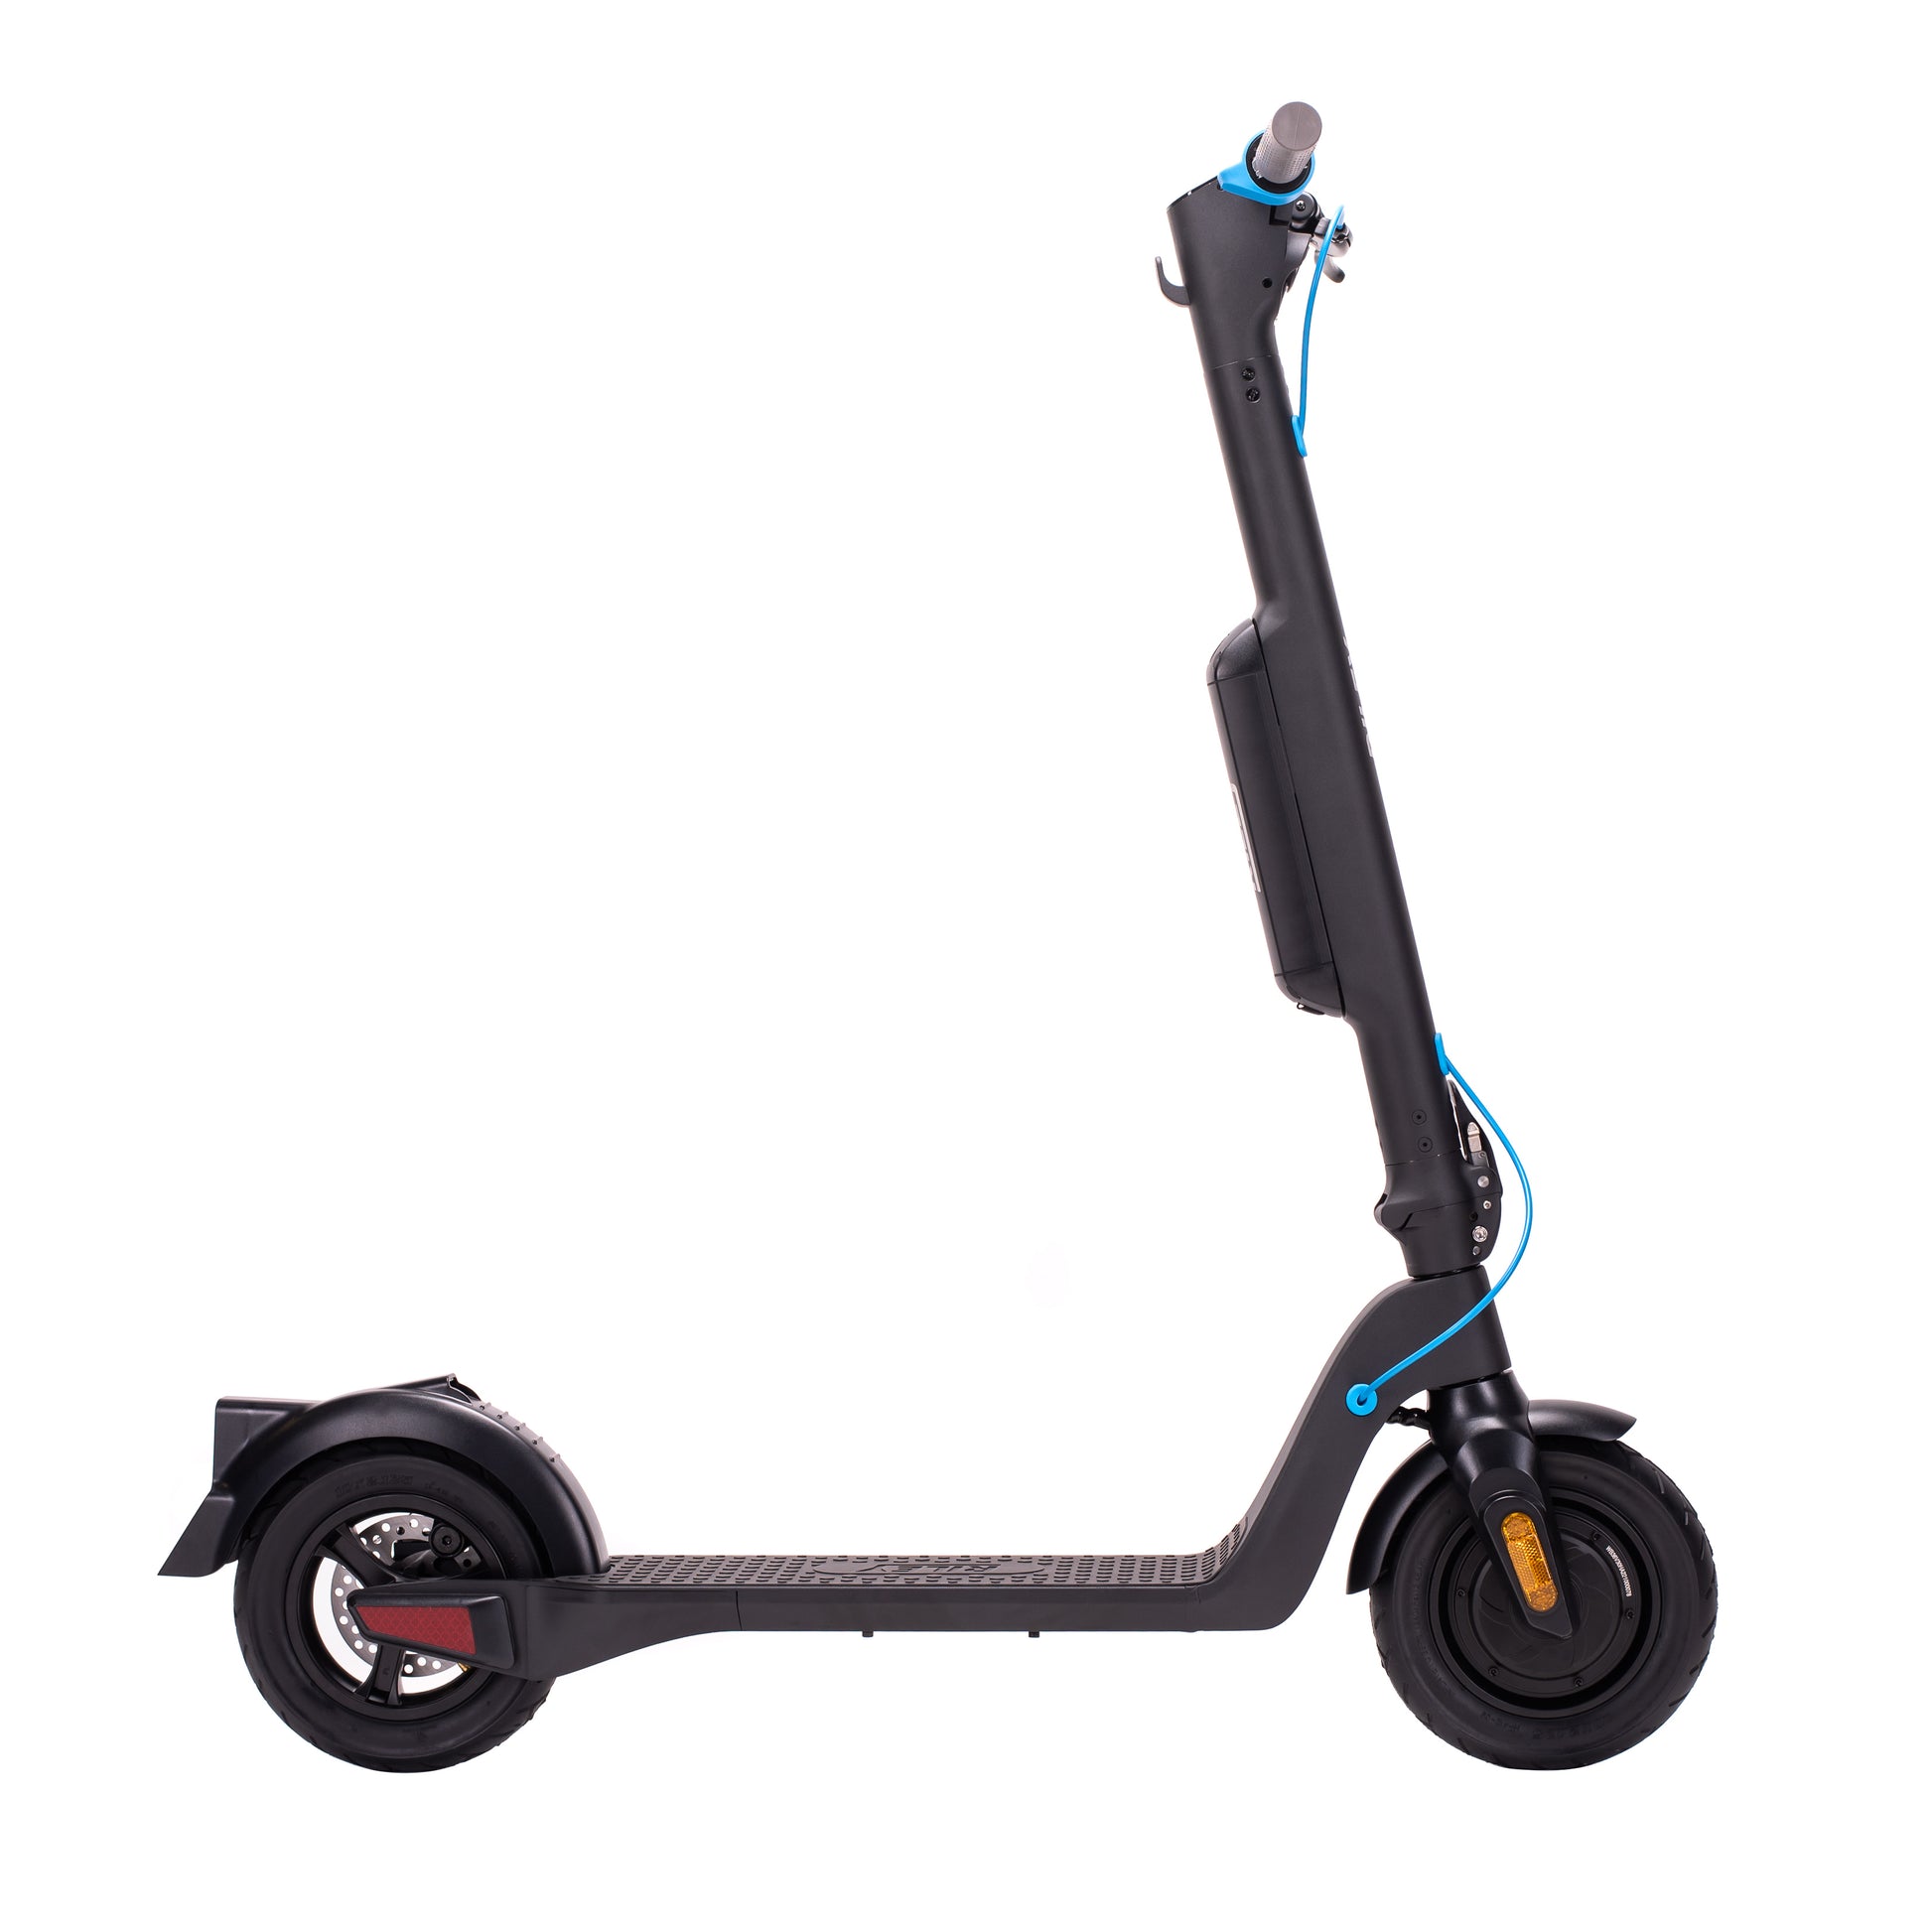 Riley RS1 V2 Adult Electric Scooter - Waterproof, 350W Motor, 25km Range, 25kmph Speed